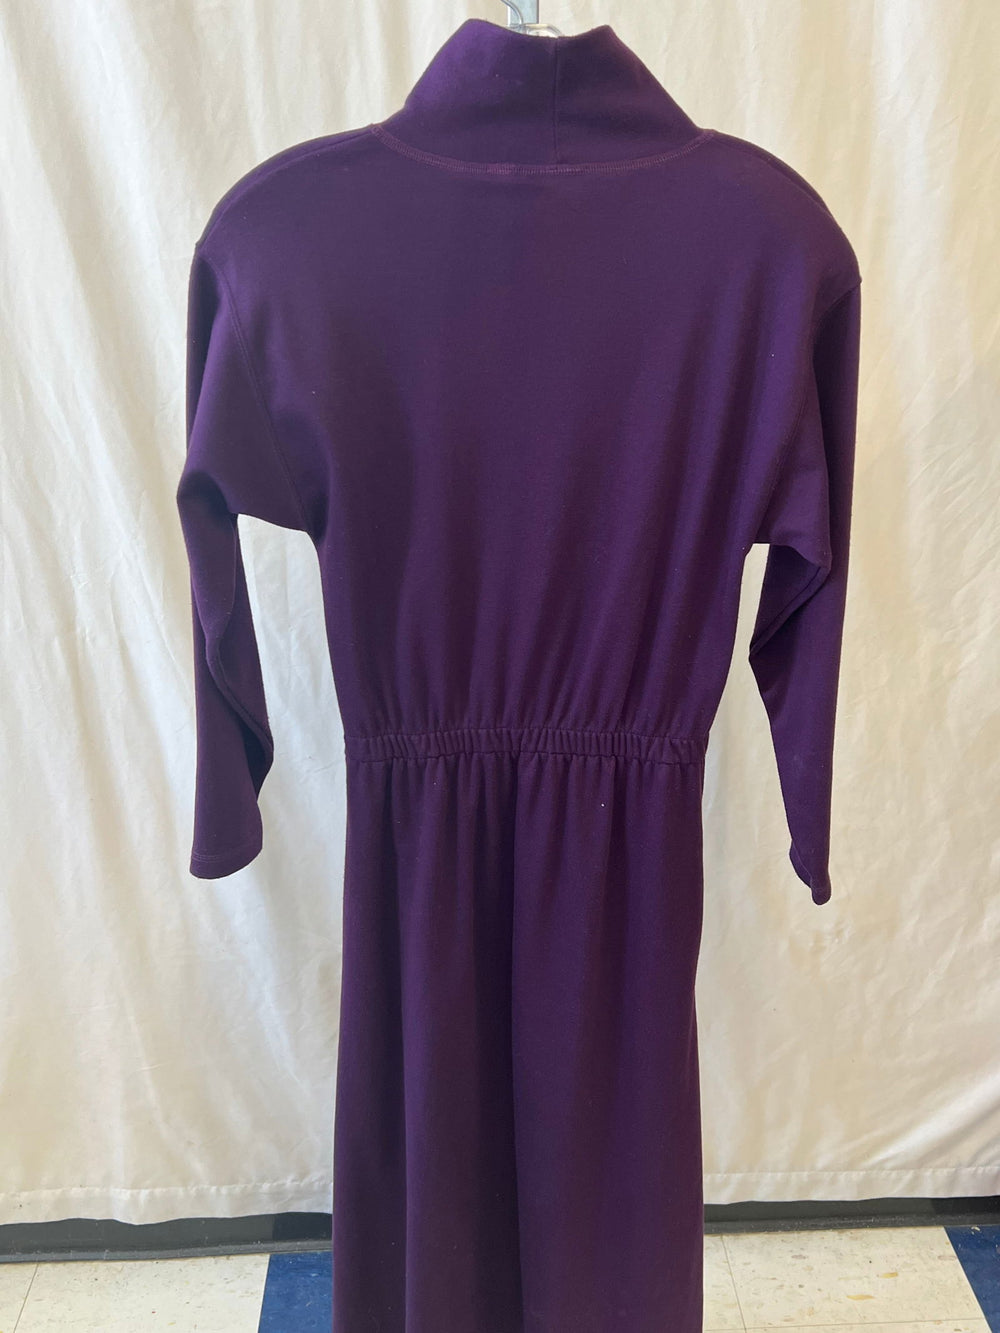 LL Bean Small Purple Long Dresses with Long Sleeves - The Kennedy Collective Thrift - 